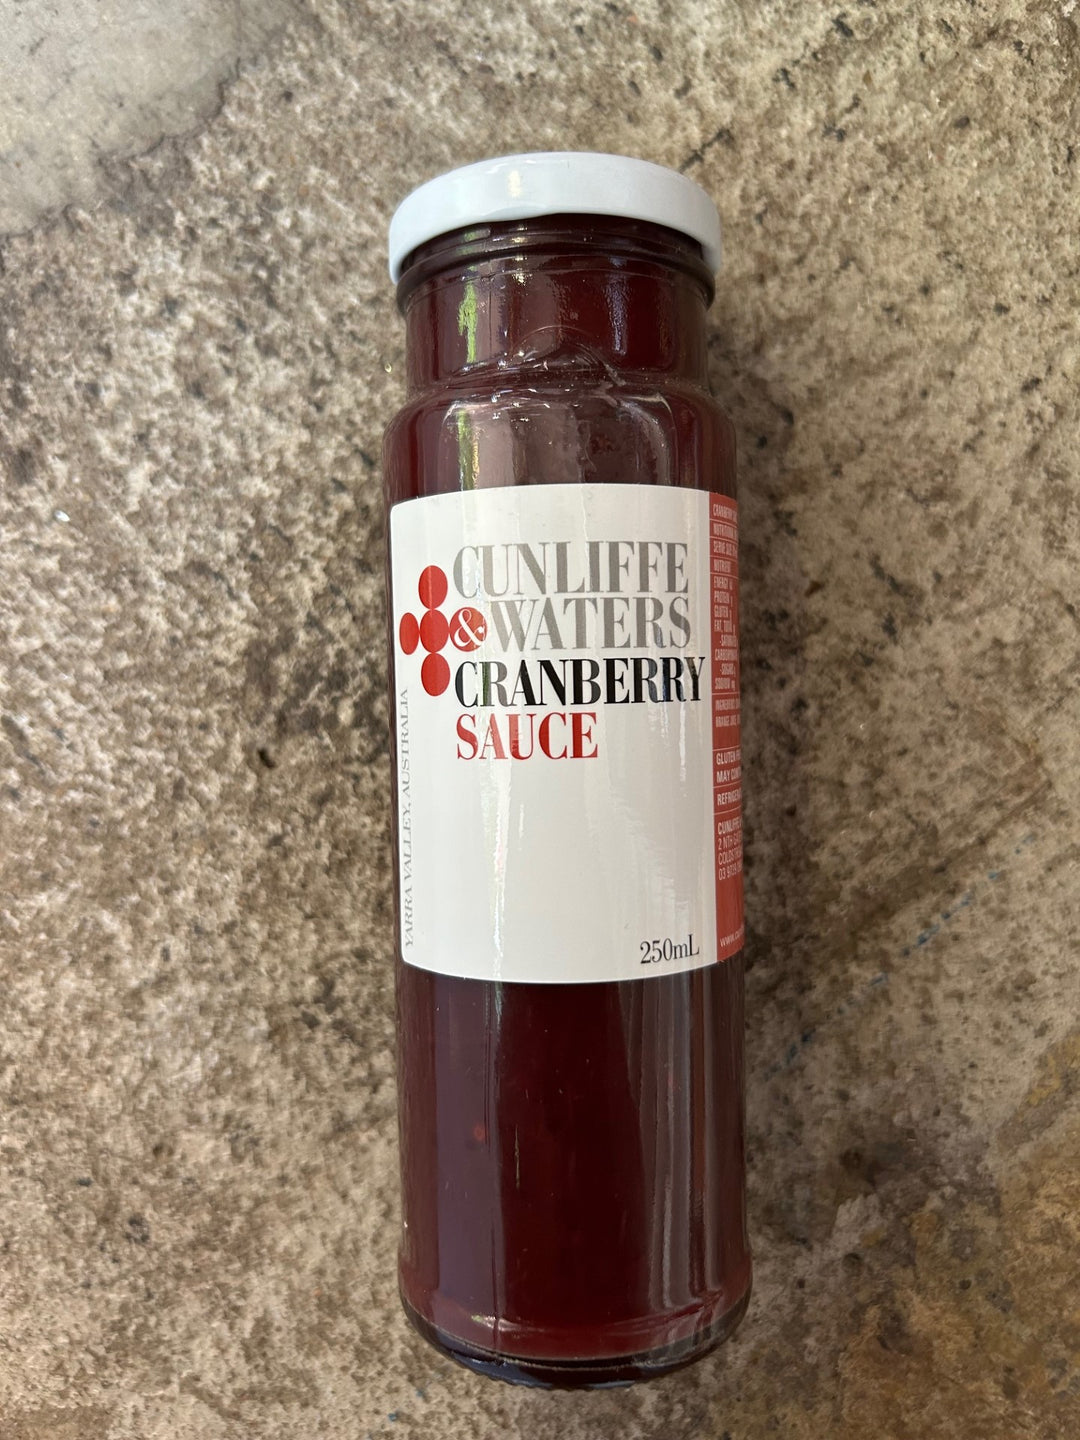 Cunliffe & Waters Cranberry Sauce